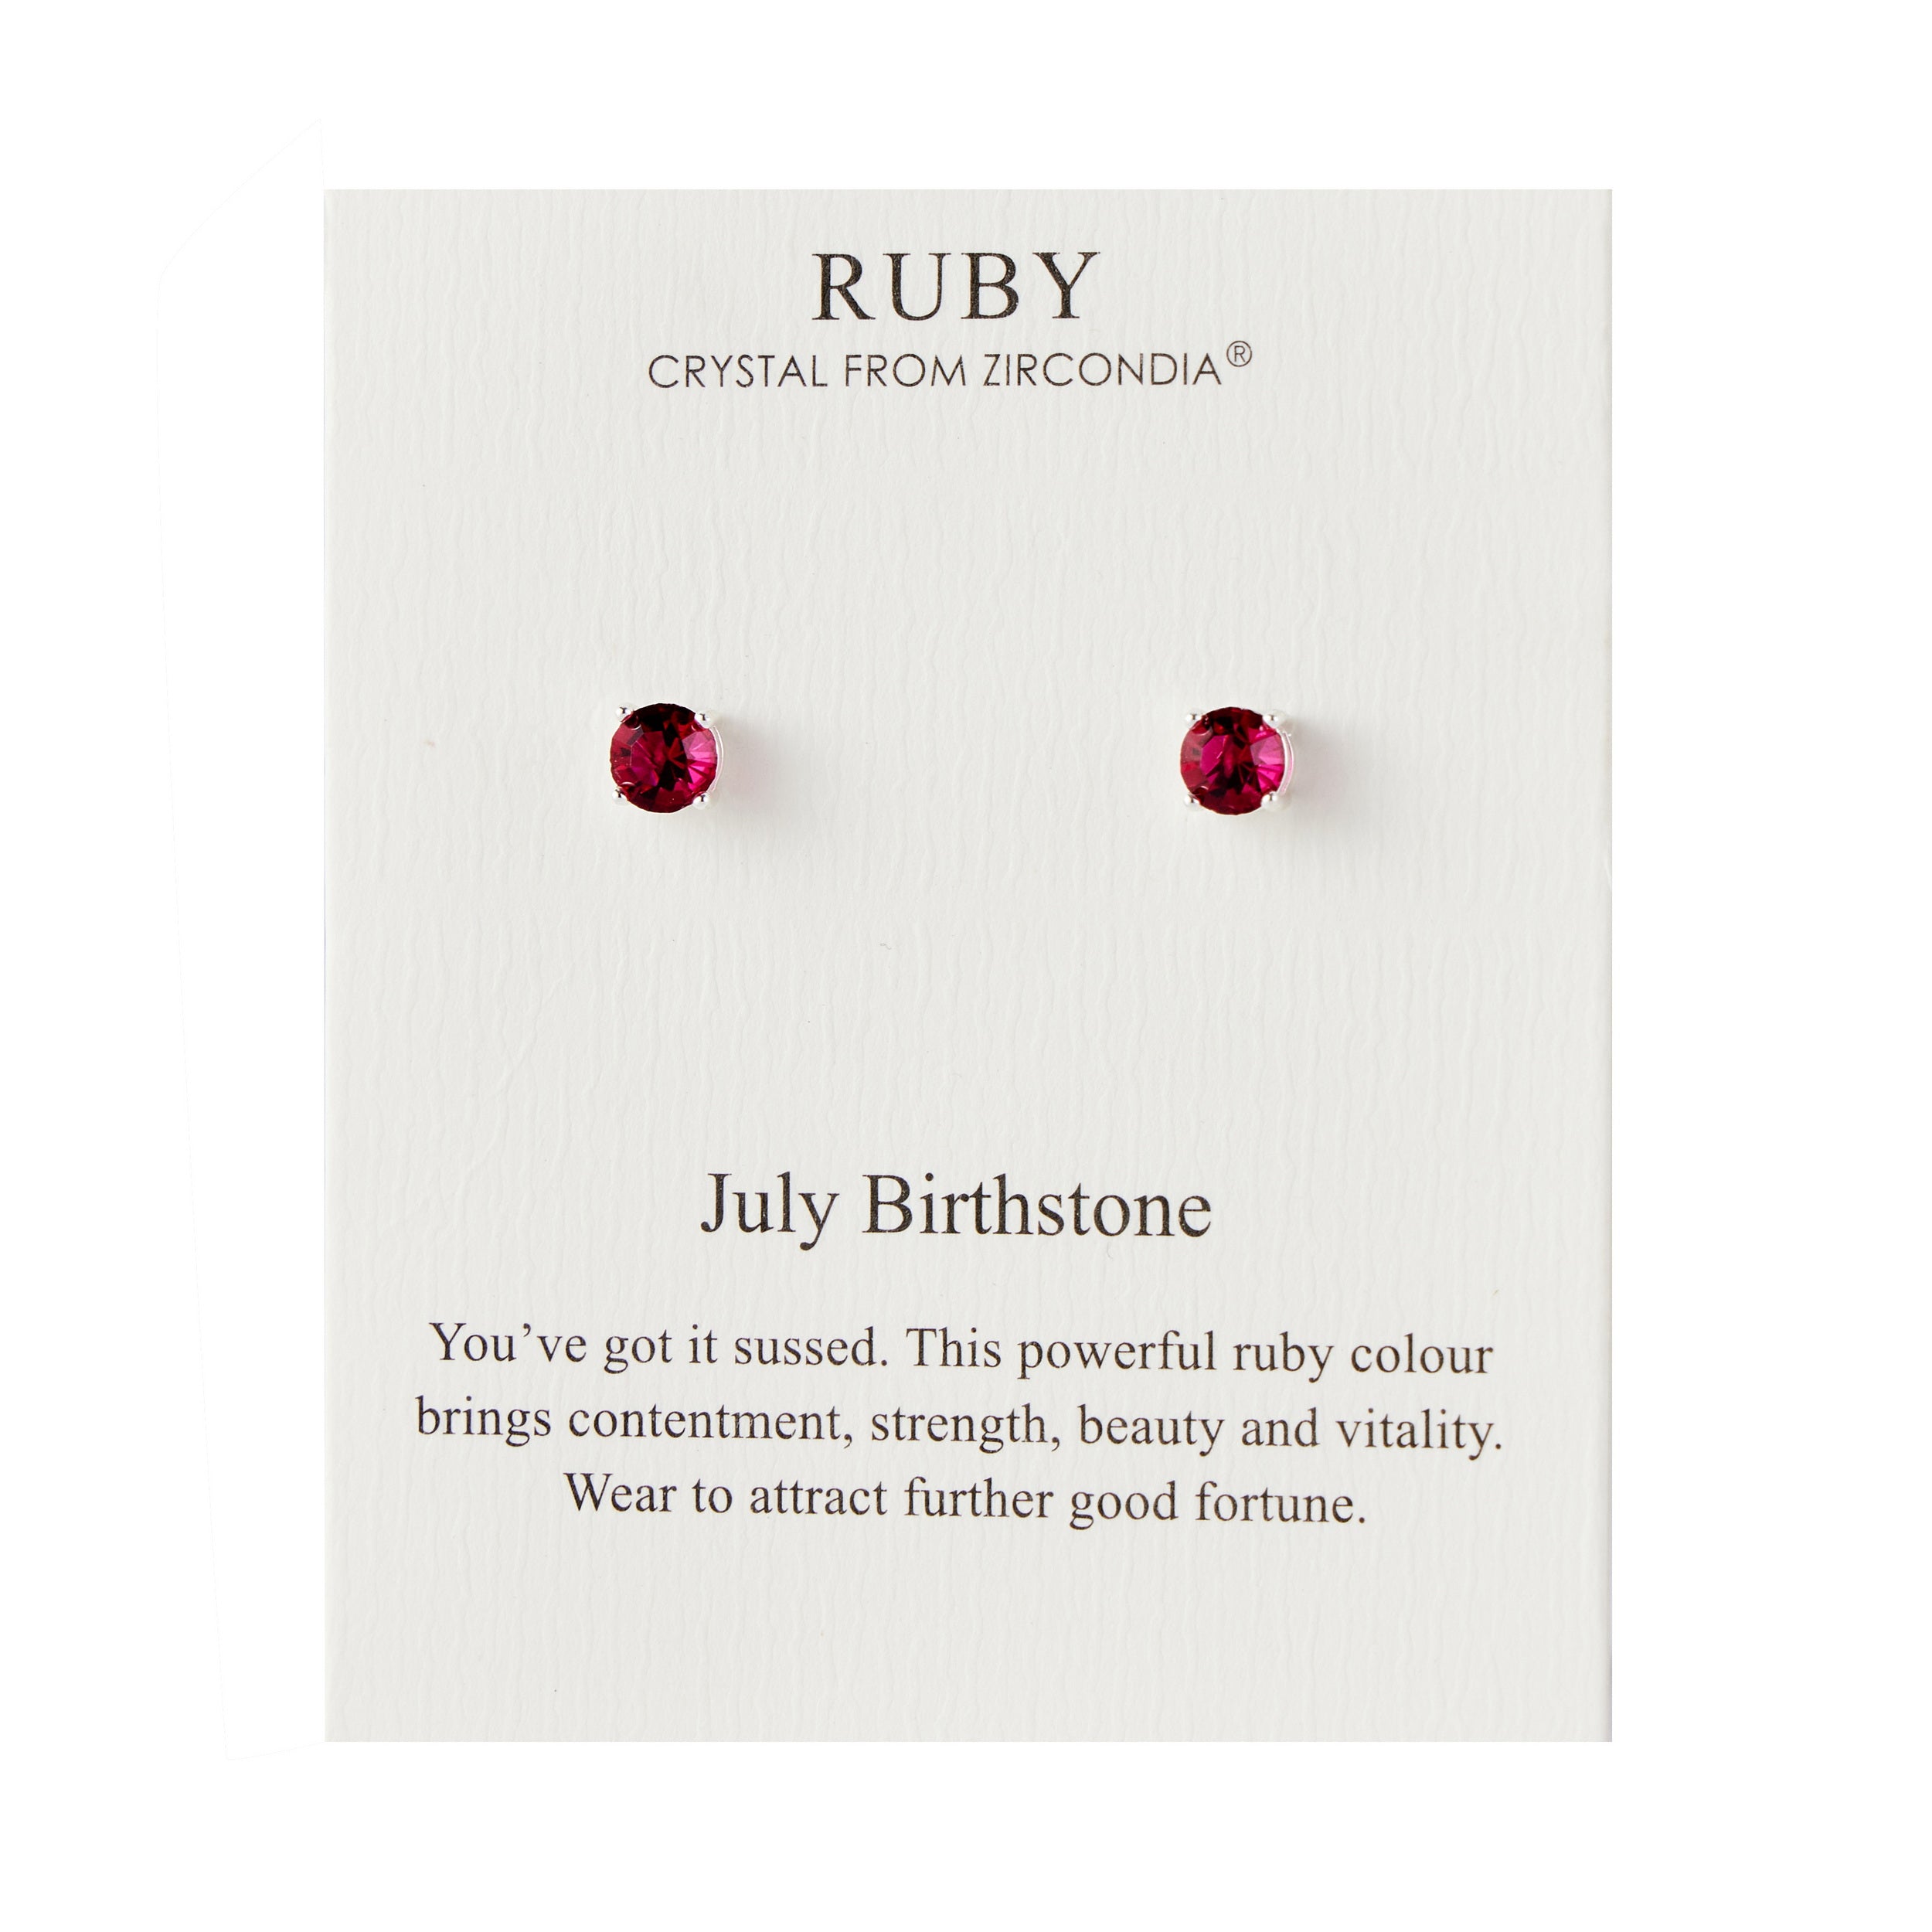 July (Ruby) Birthstone Earrings Created with Zircondia® Crystals